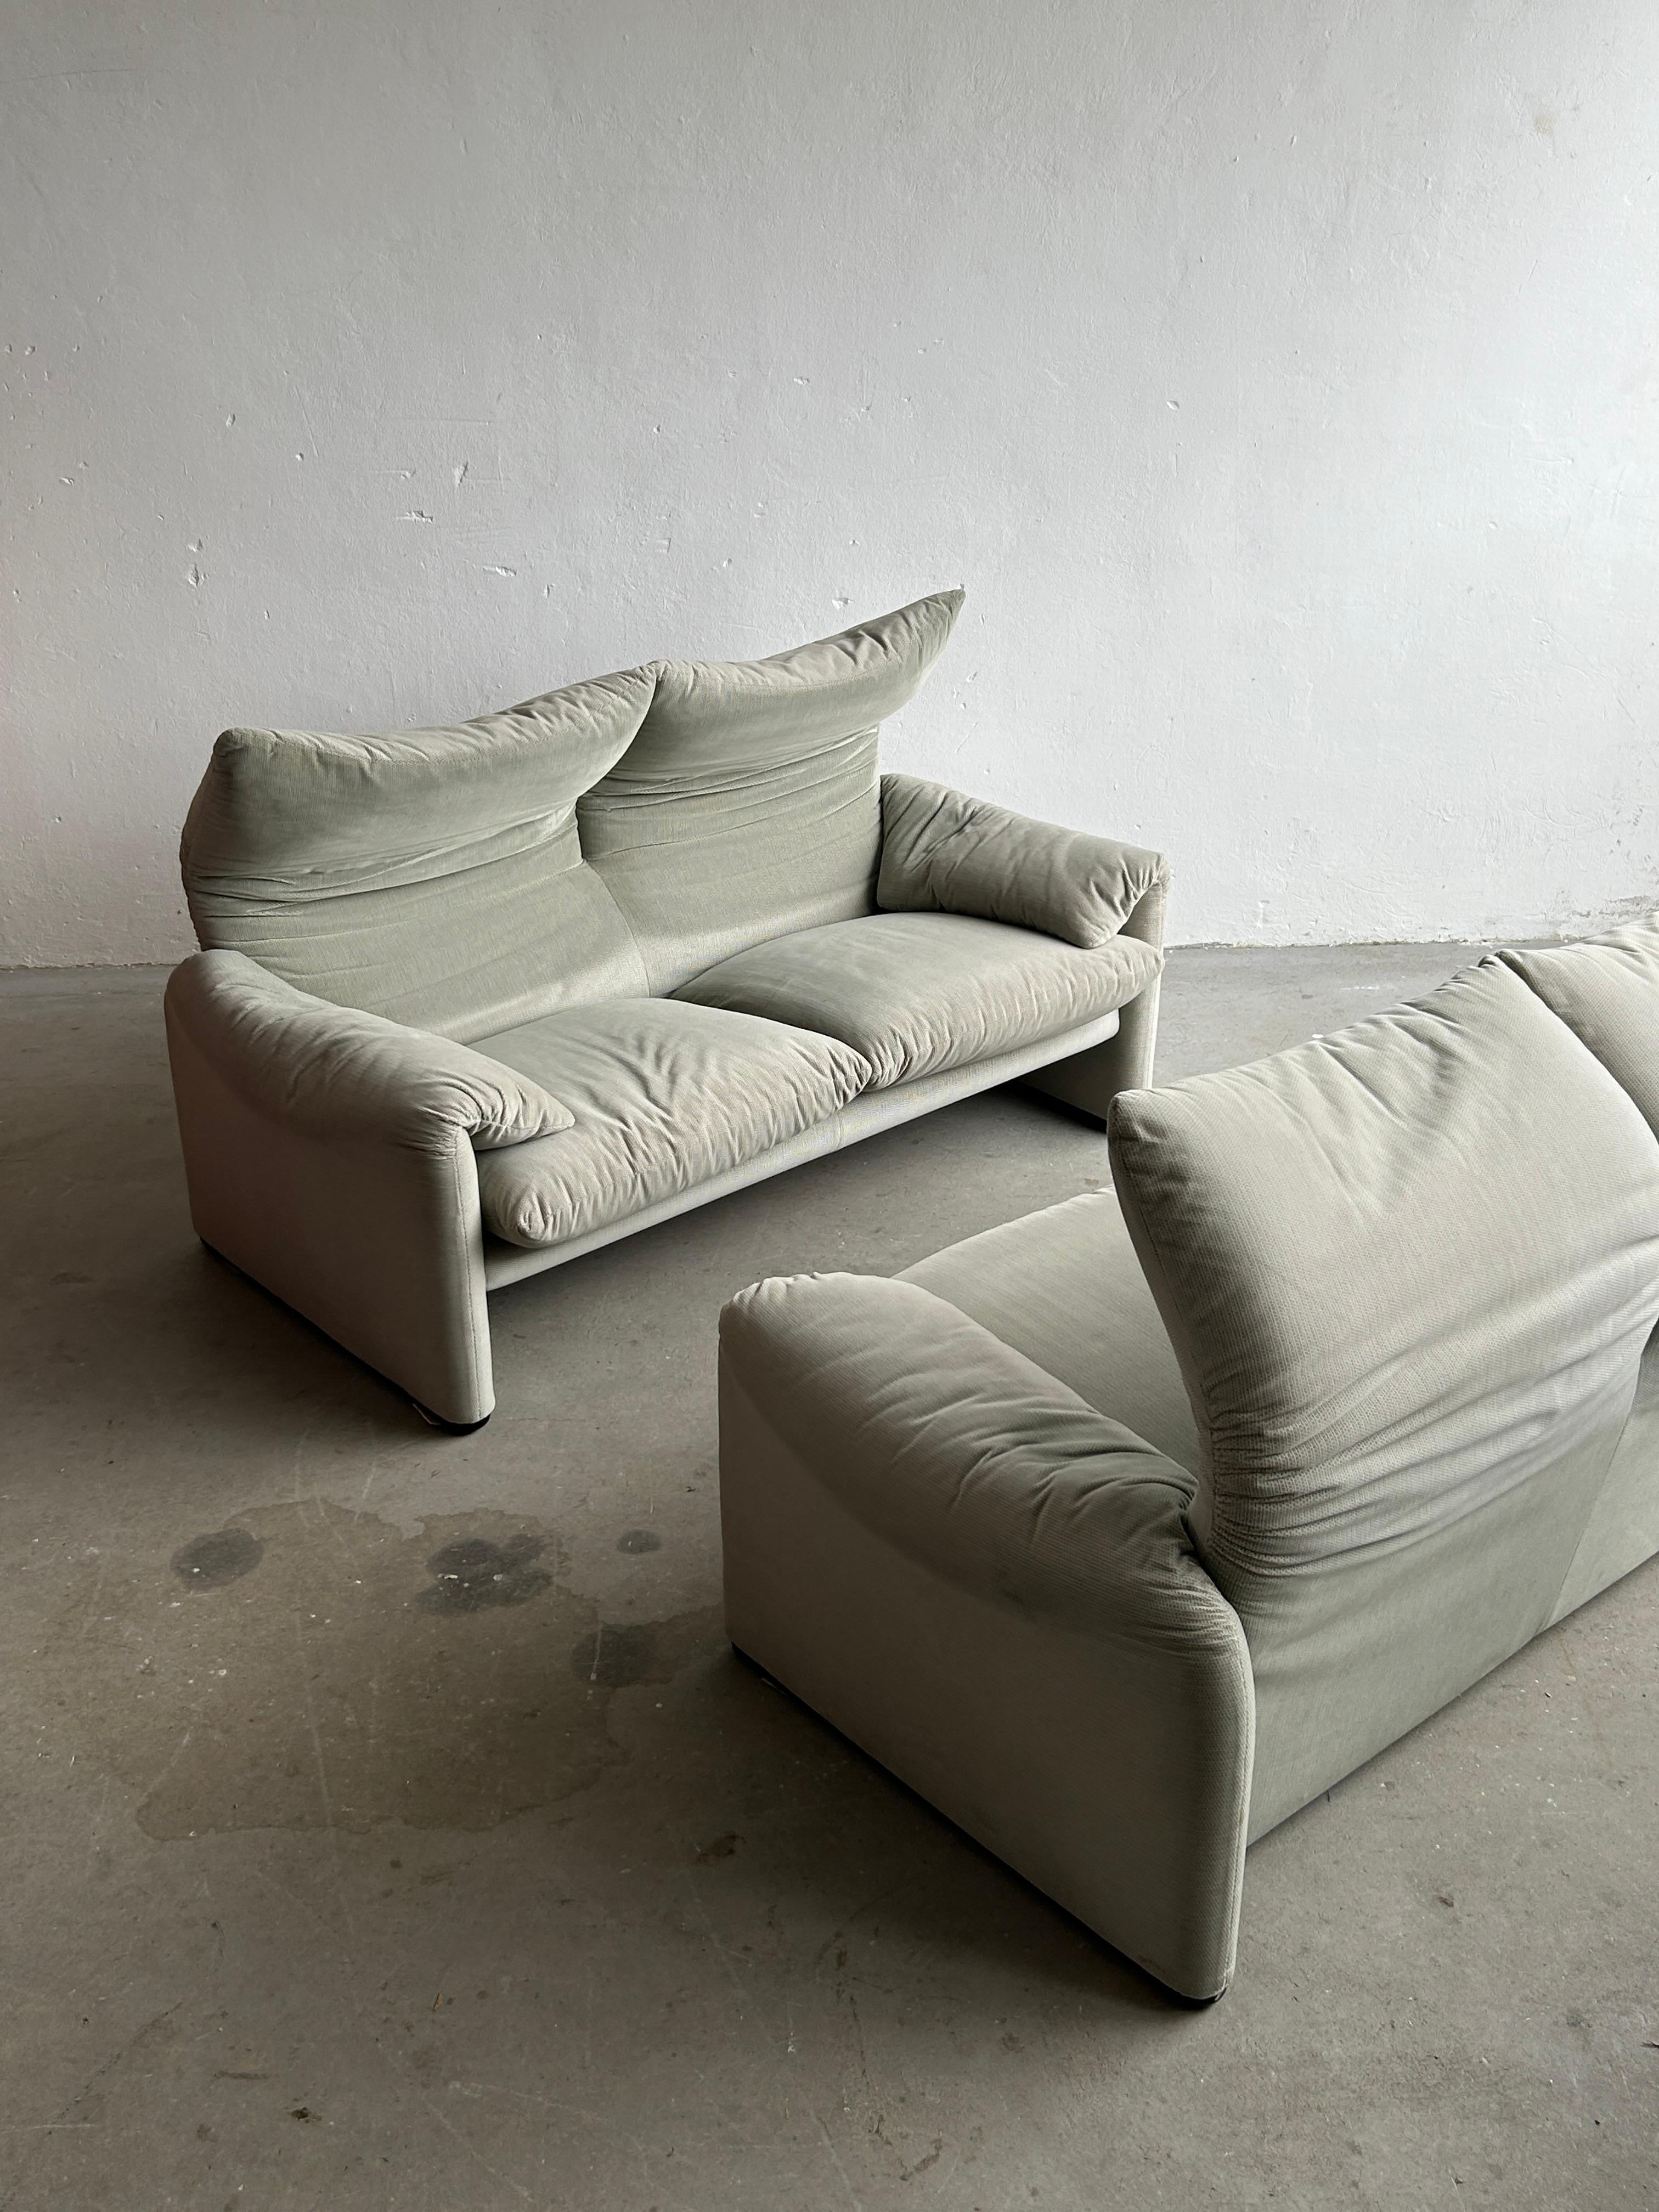 Pair of Vintage 'Maralunga' Two-Seater Sofas, Vico Magistretti for Cassina, 1970 1